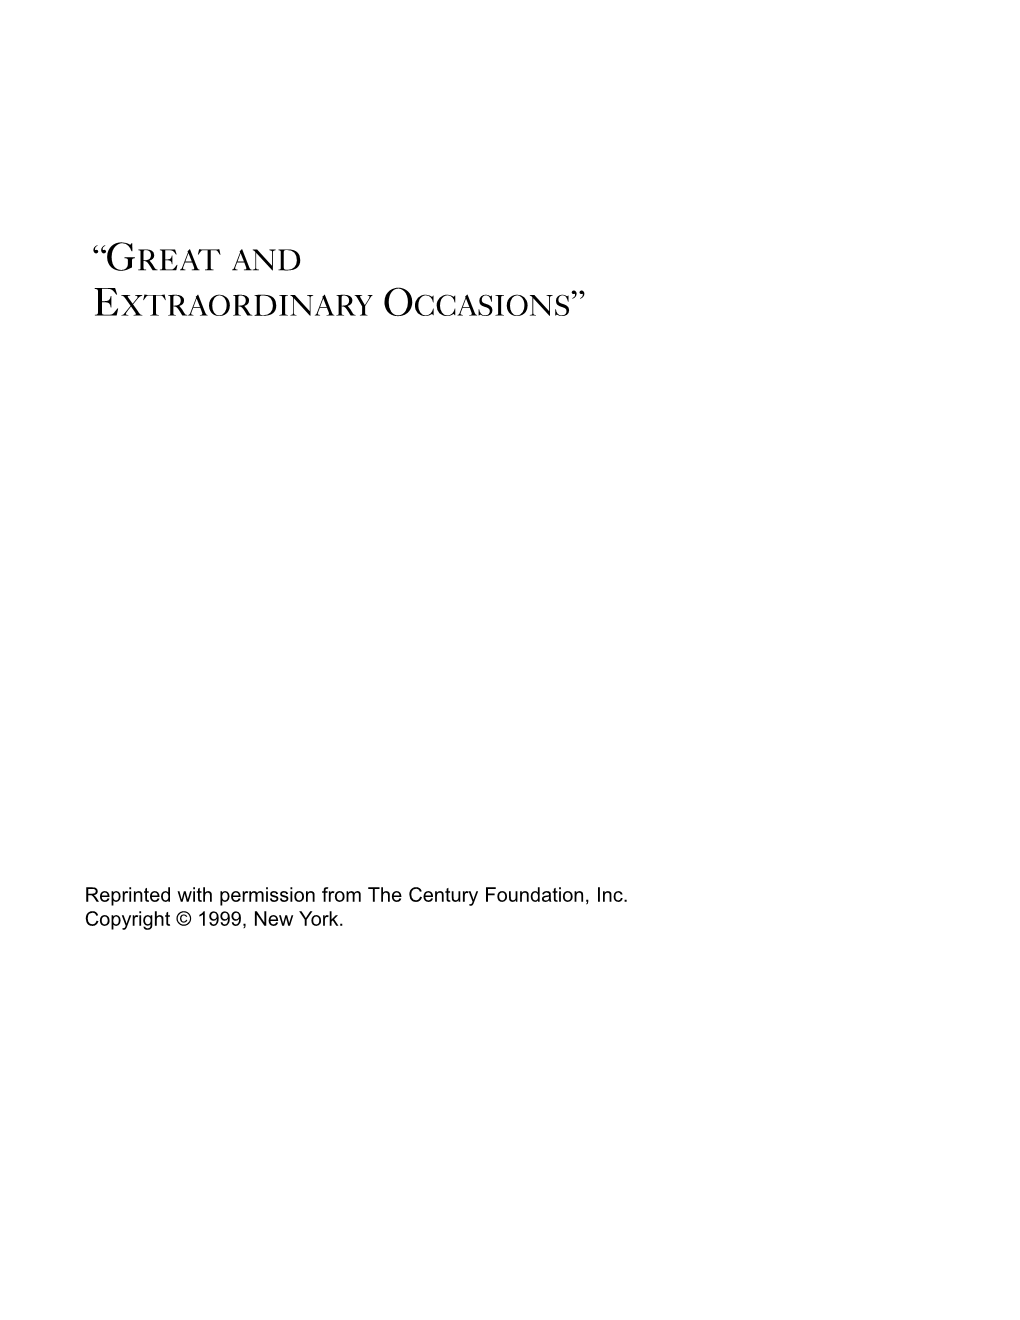 “Great and Extraordinary Occasions”